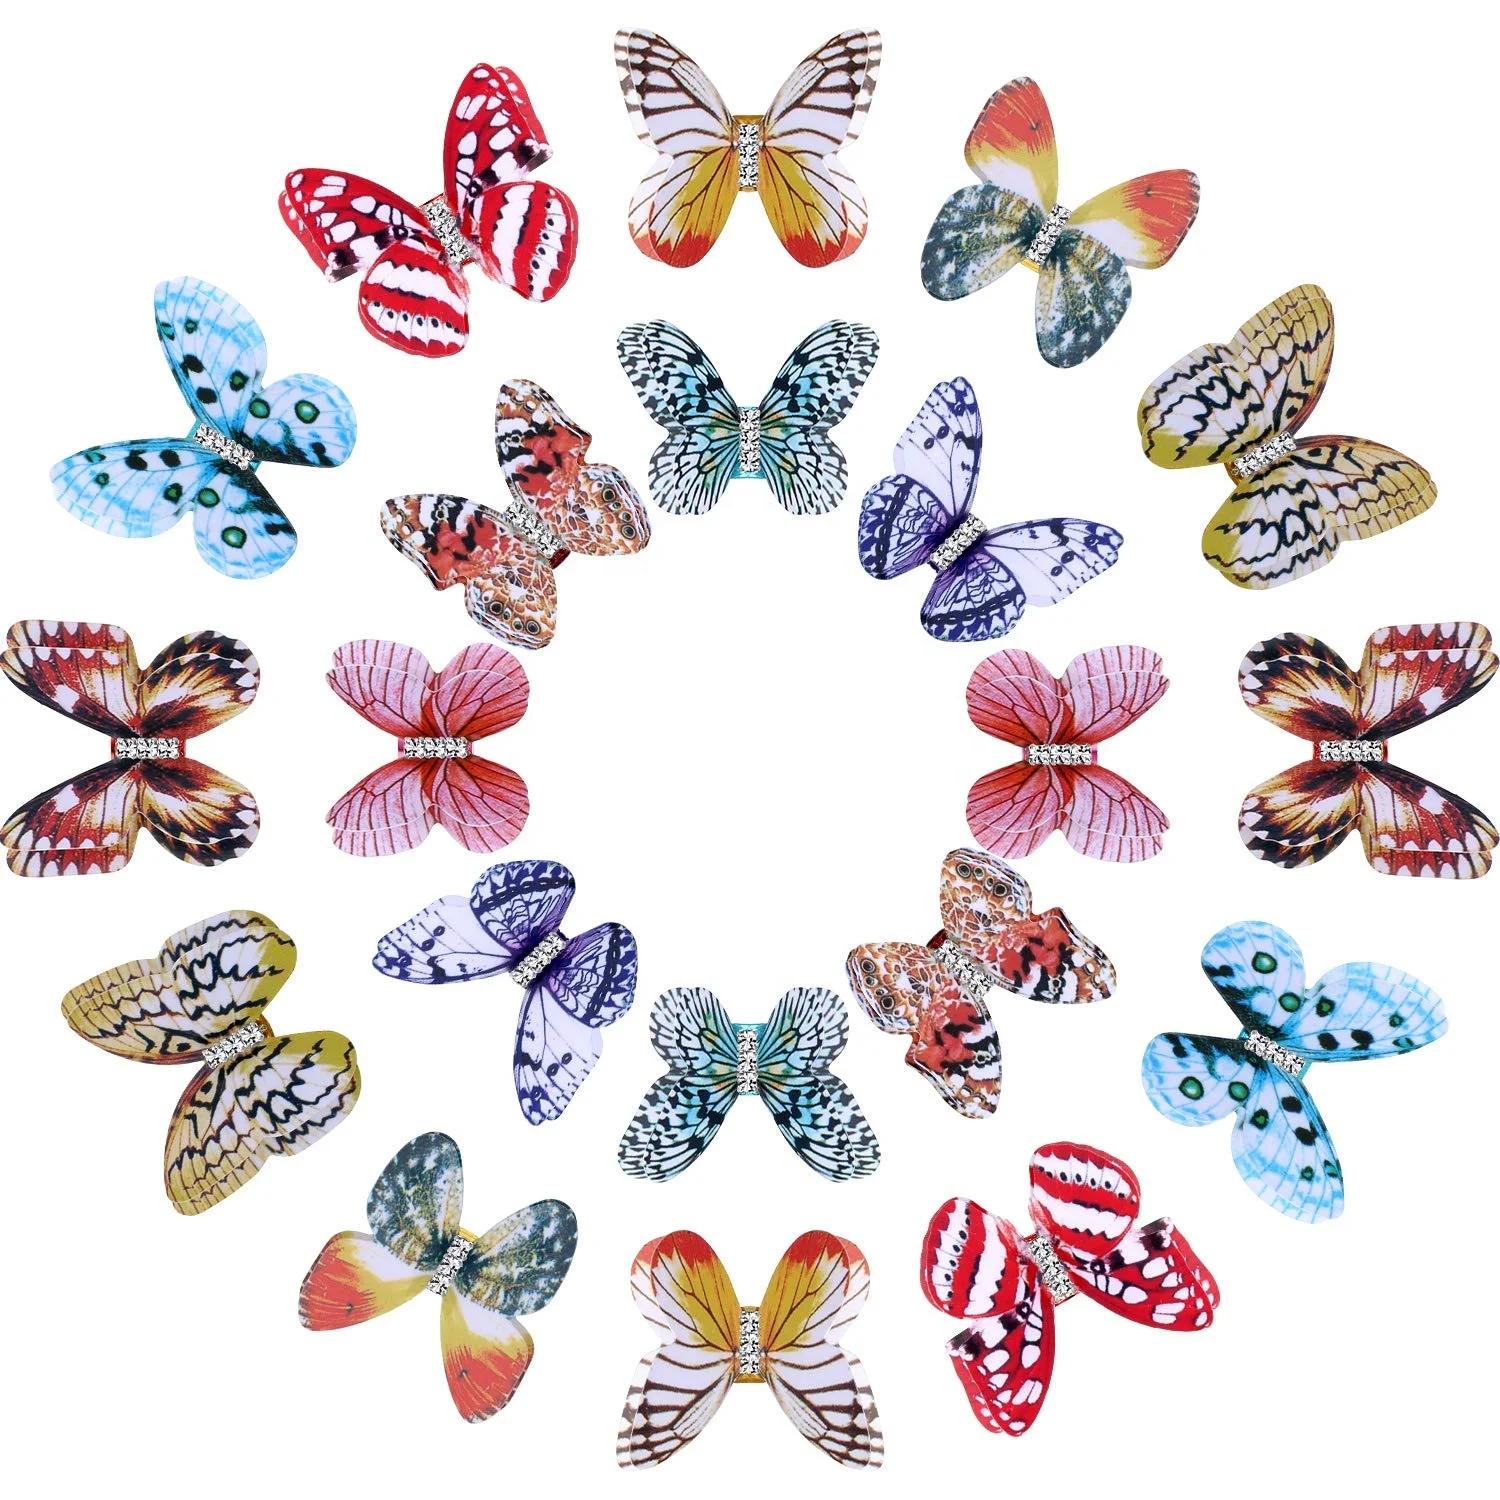 

African Kids Children Colorful Butterfly Cuffs Loc Jewelry Hair Beads For Dreadlock Braiding Hair Extension, Custom color